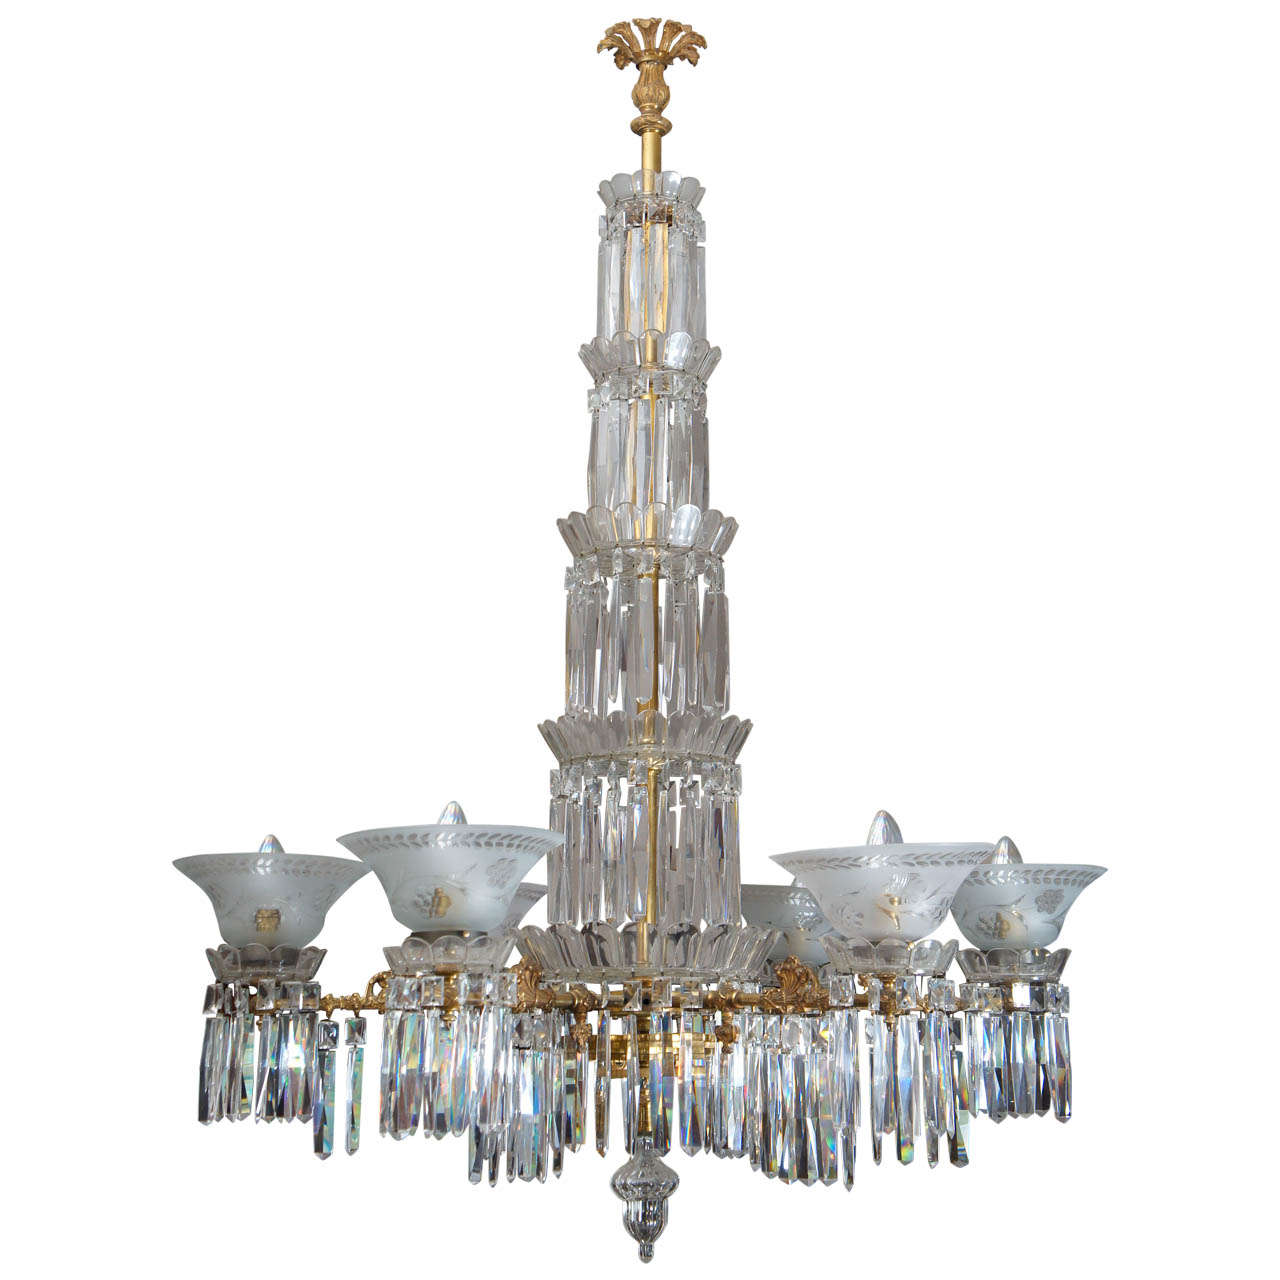 19th c. American Cut Crystal and Gilt Bronze 6 Light Gasolier/Chandelier For Sale